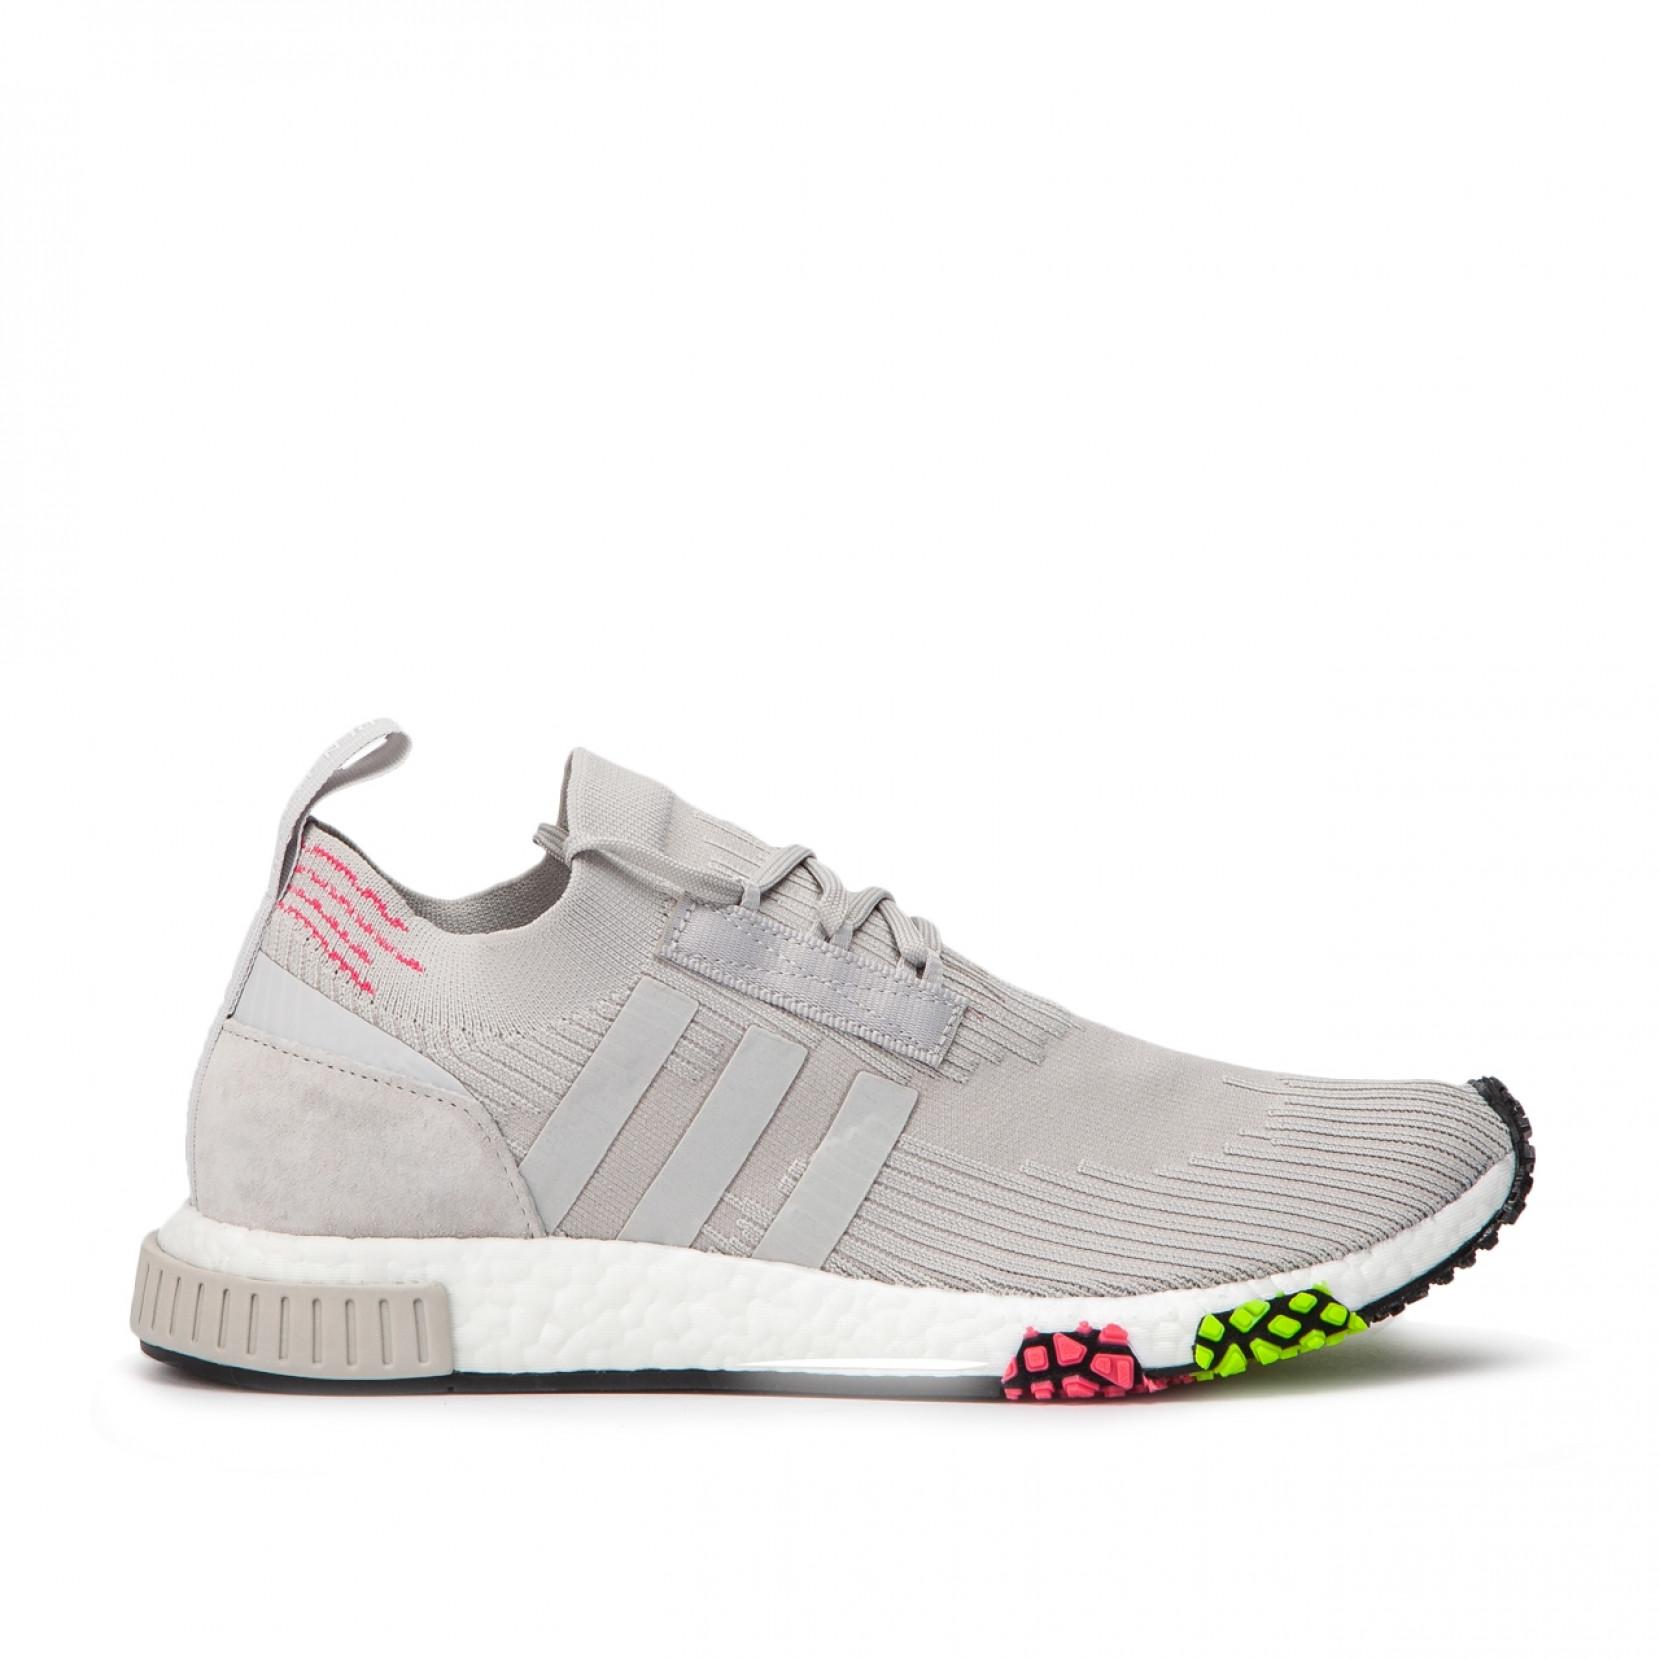 adidas Synthetic Nmd Racer Primeknit Trainer in Grey (Gray) for Men - Lyst